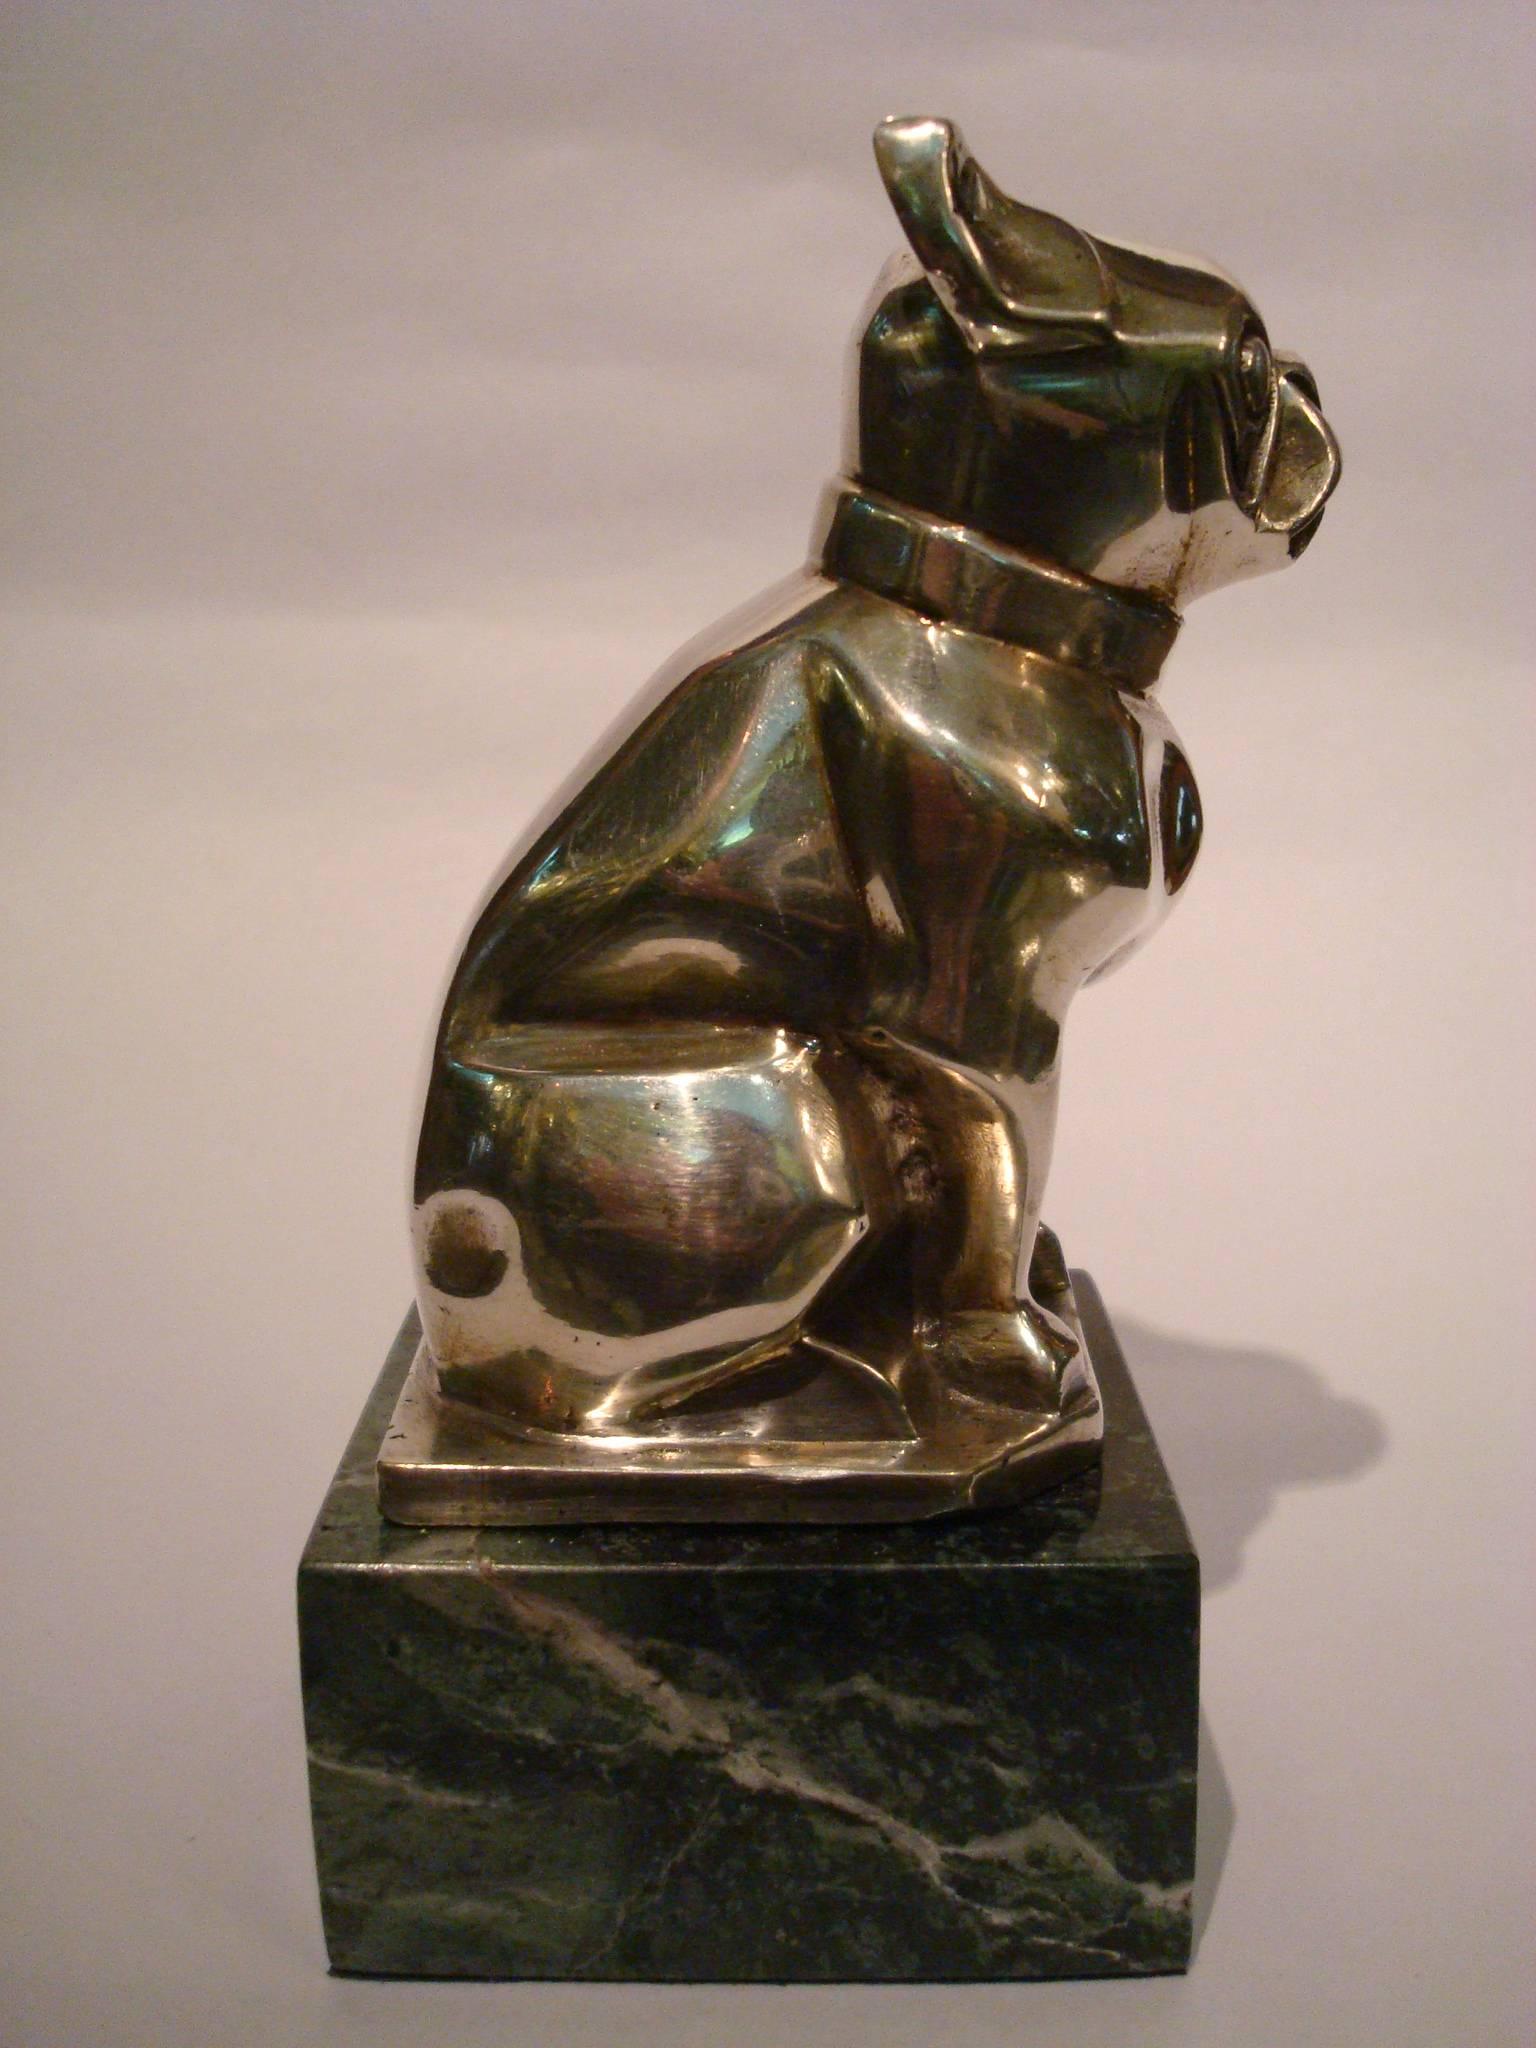 Silvered Art Deco French Bulldog Bookend or Paperweight, France, 1925